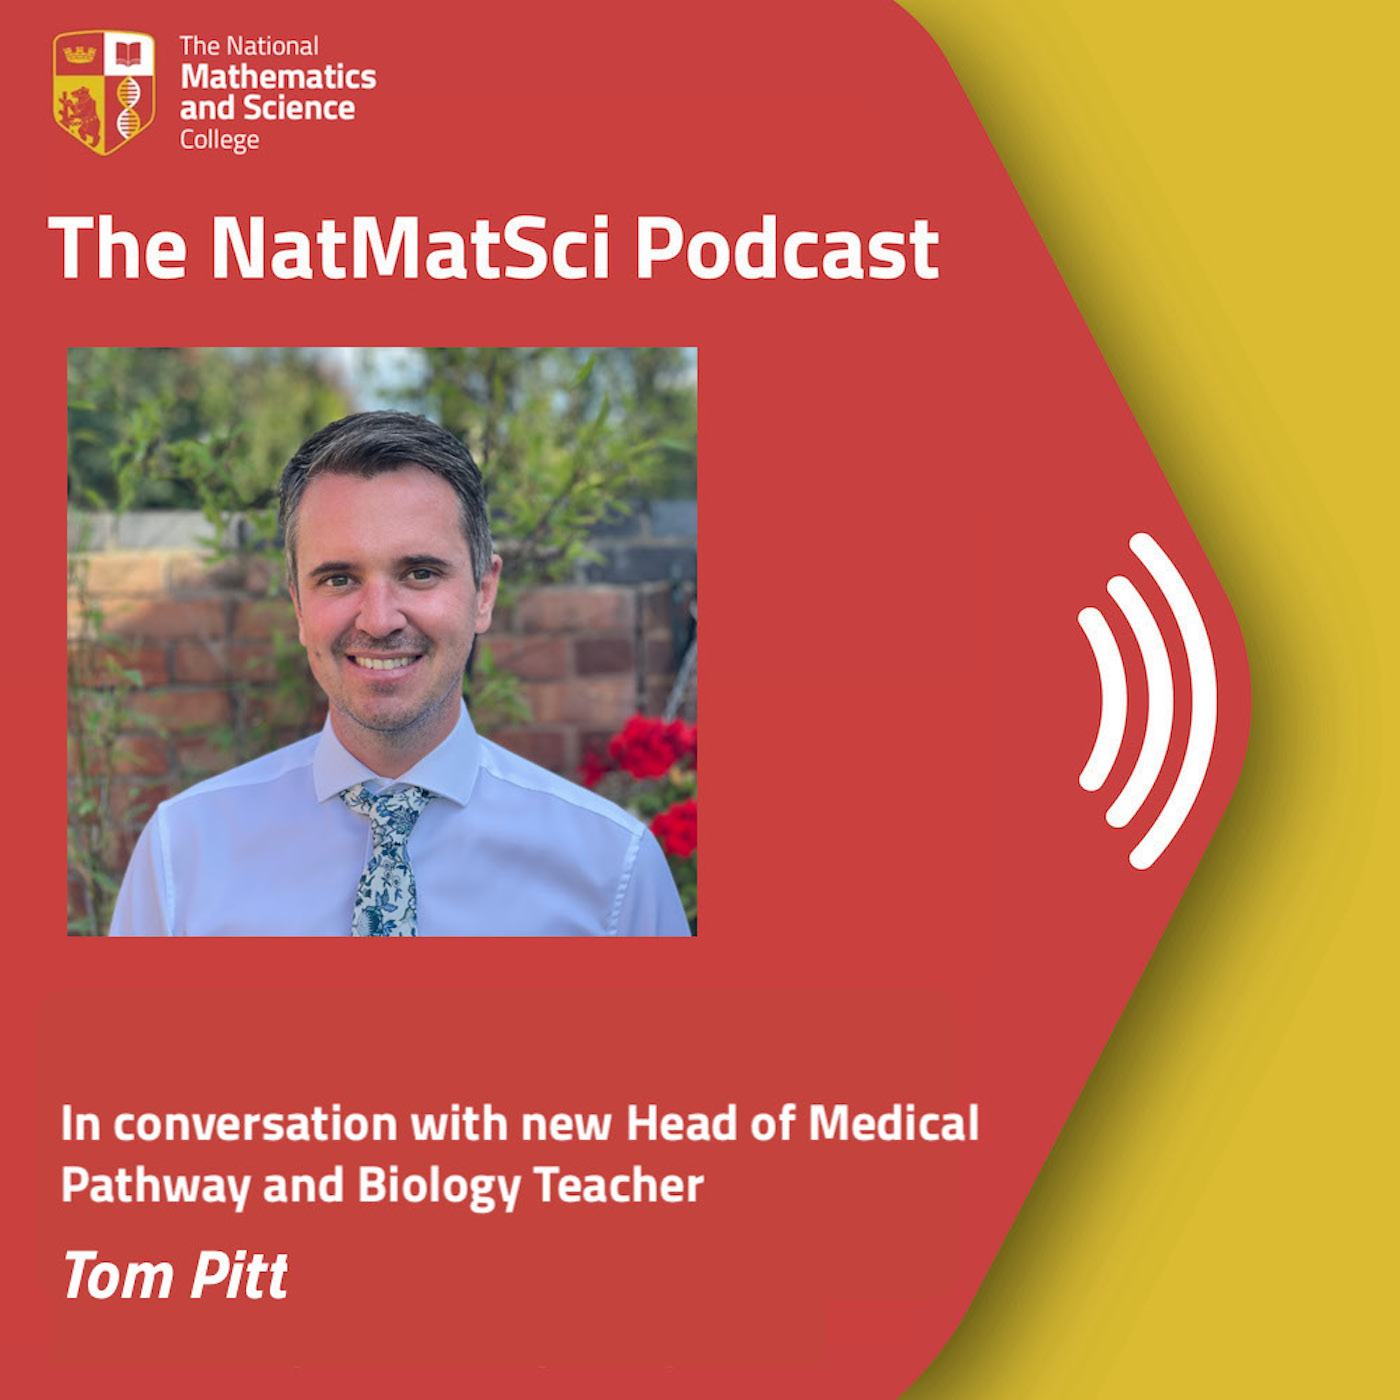 In conversation with new Head of Medical Pathway and Biology Teacher, Tom Pitt